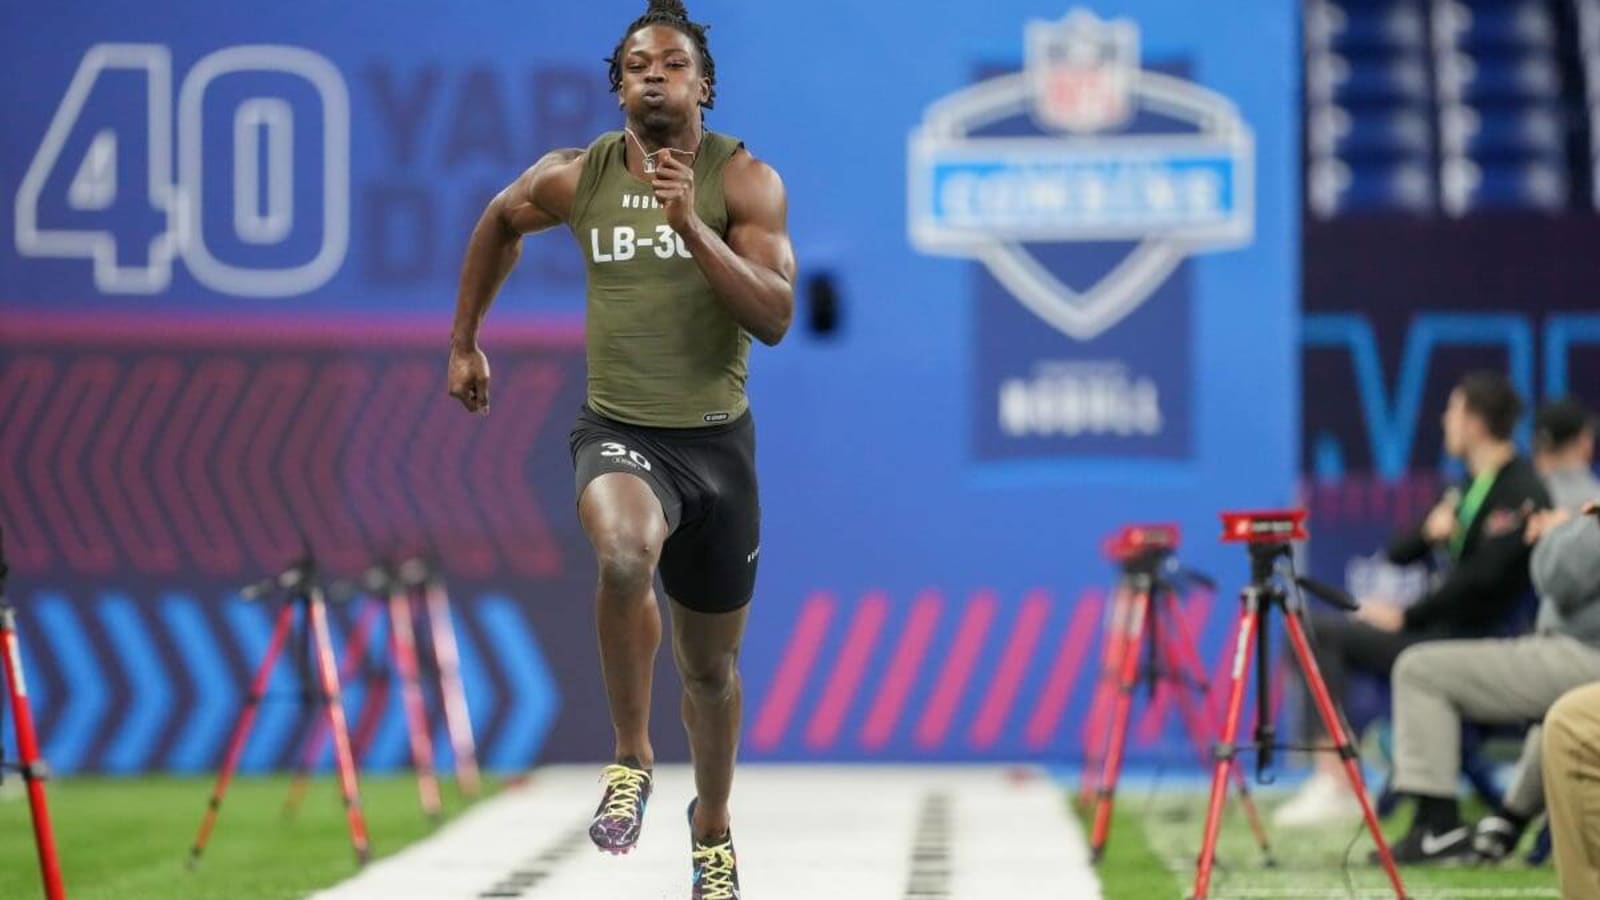 Charlie Thomas Shines At NFL Combine